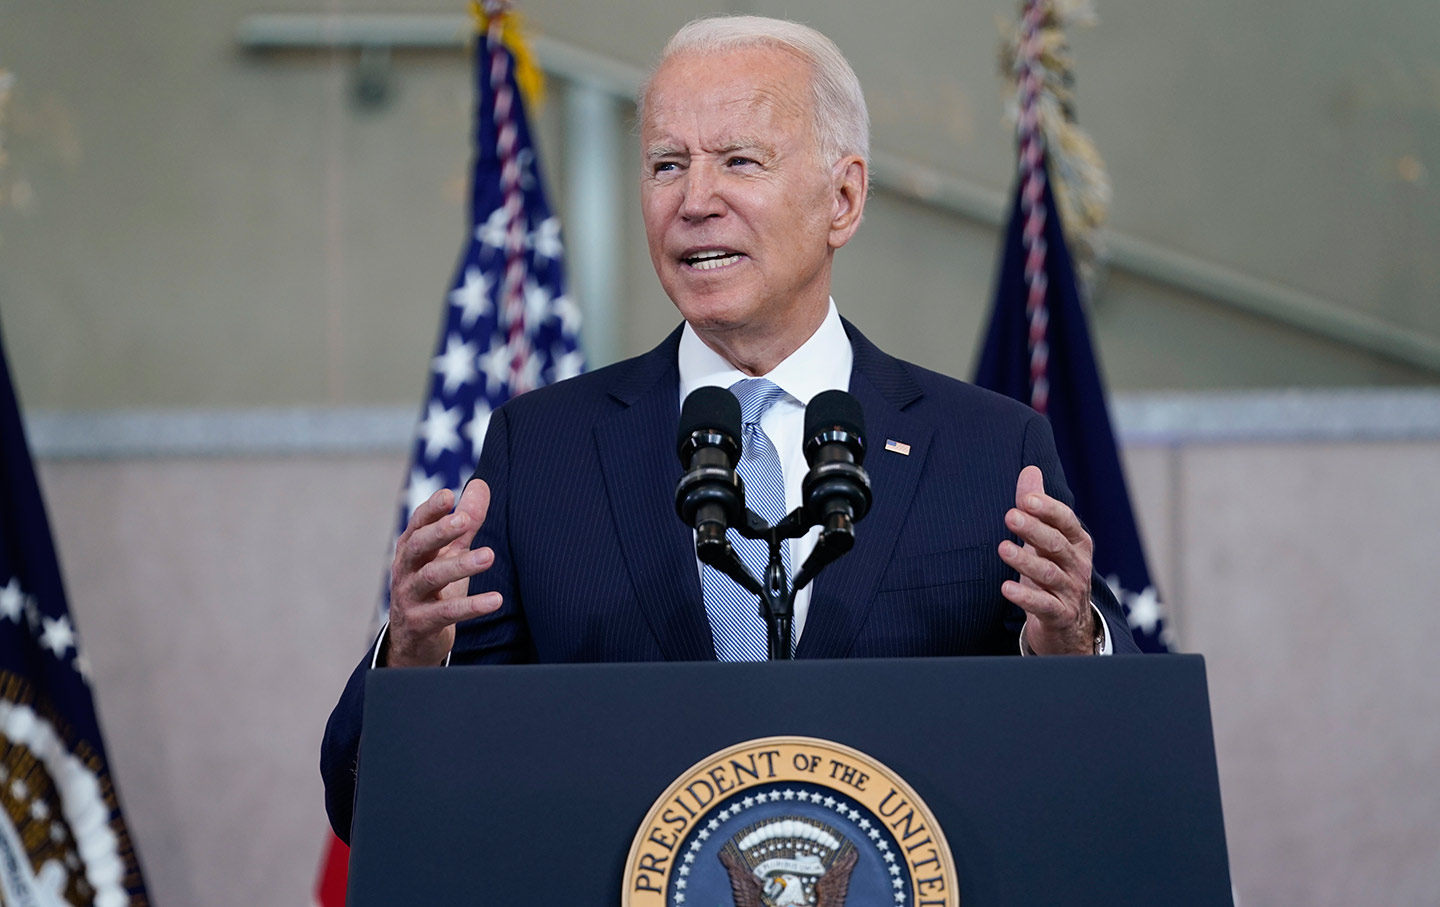 Biden Is Not Meeting the Moment on Voting Rights